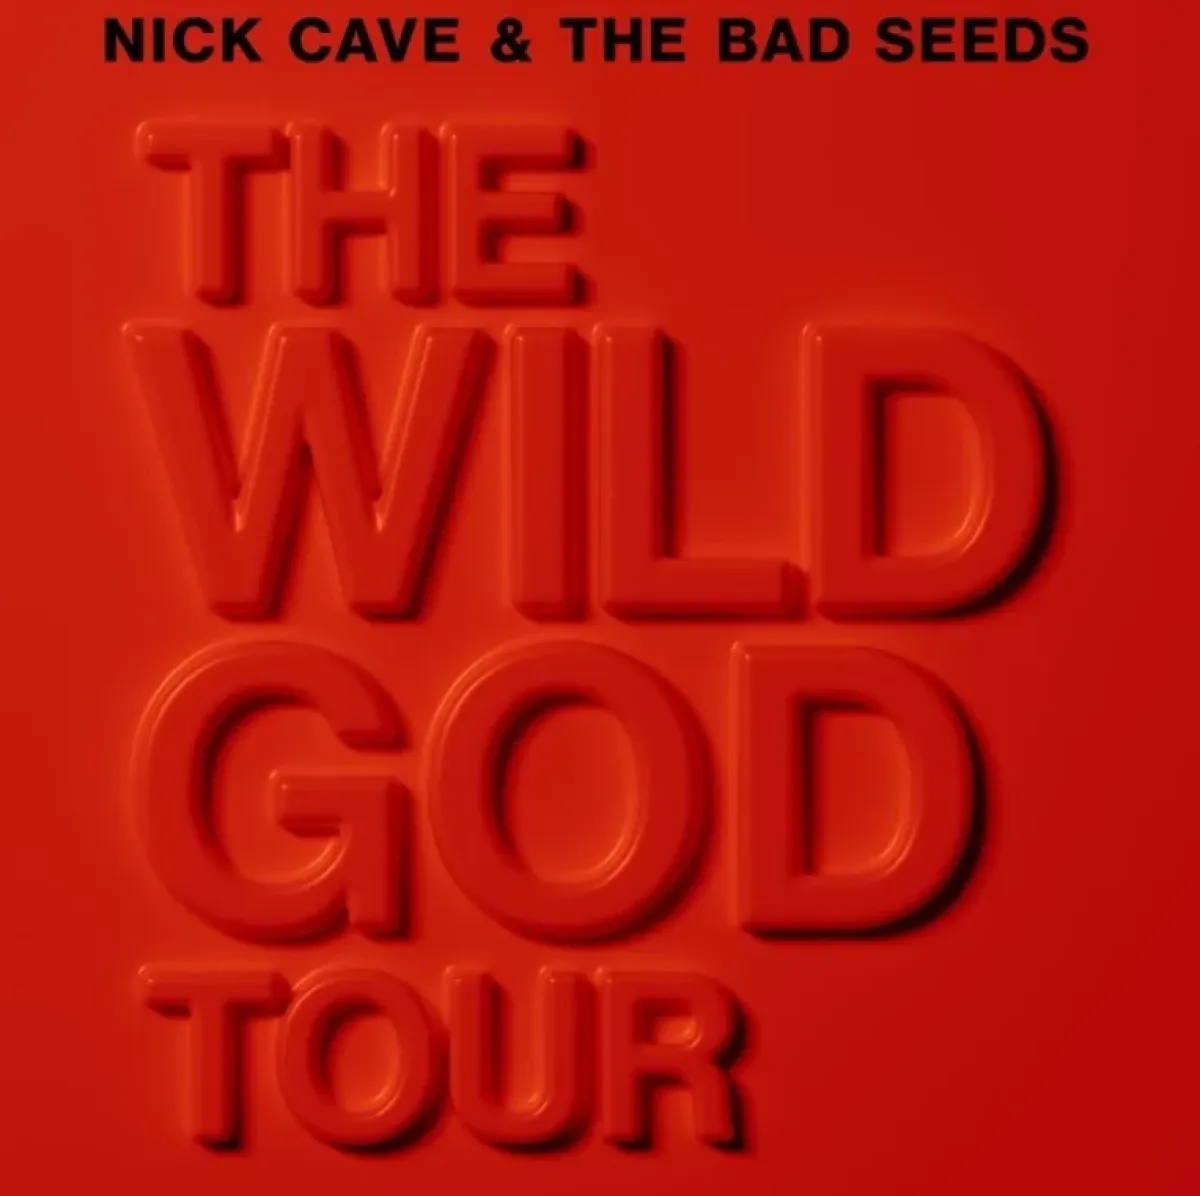 Nick Cave And The Bad Seeds at Resorts World Arena Tickets